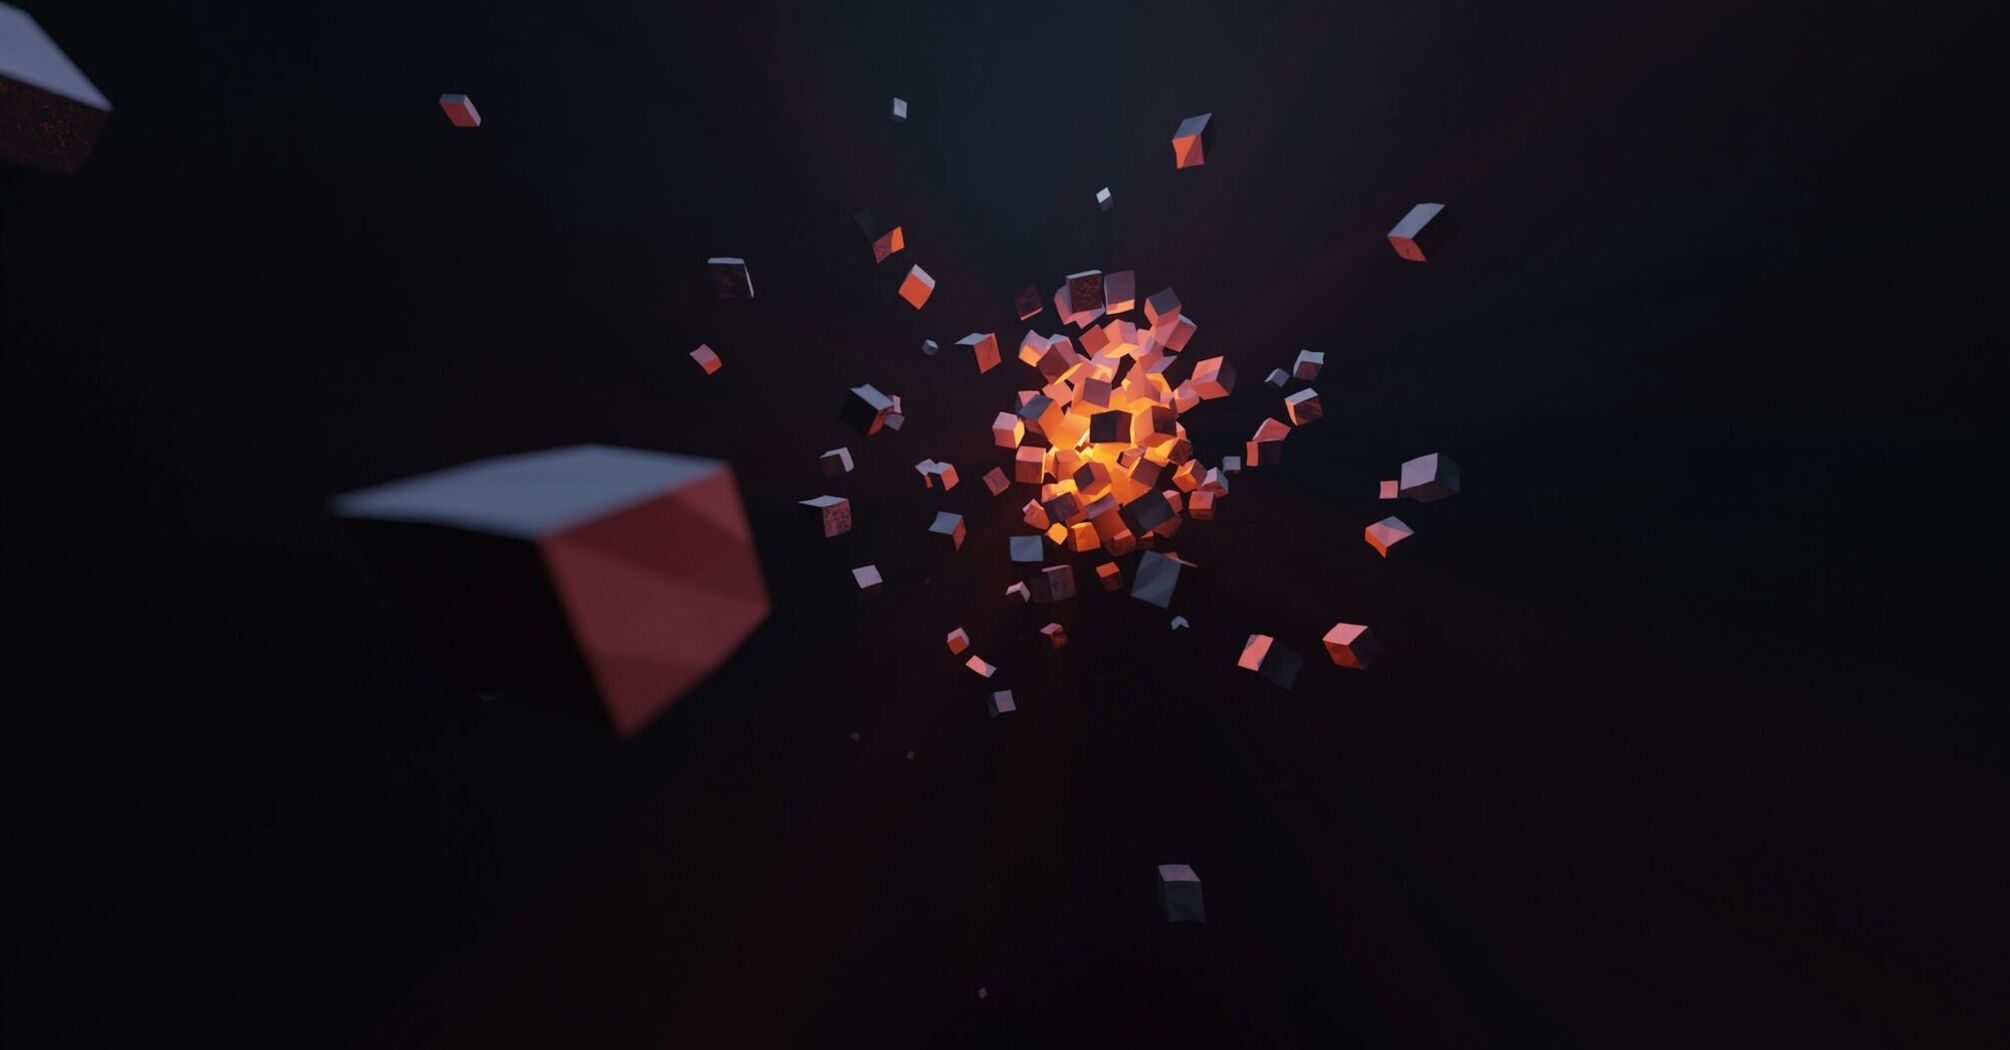 Abstract image of glowing orange cubes expanding from a central point against a dark background with scattered smaller cubes